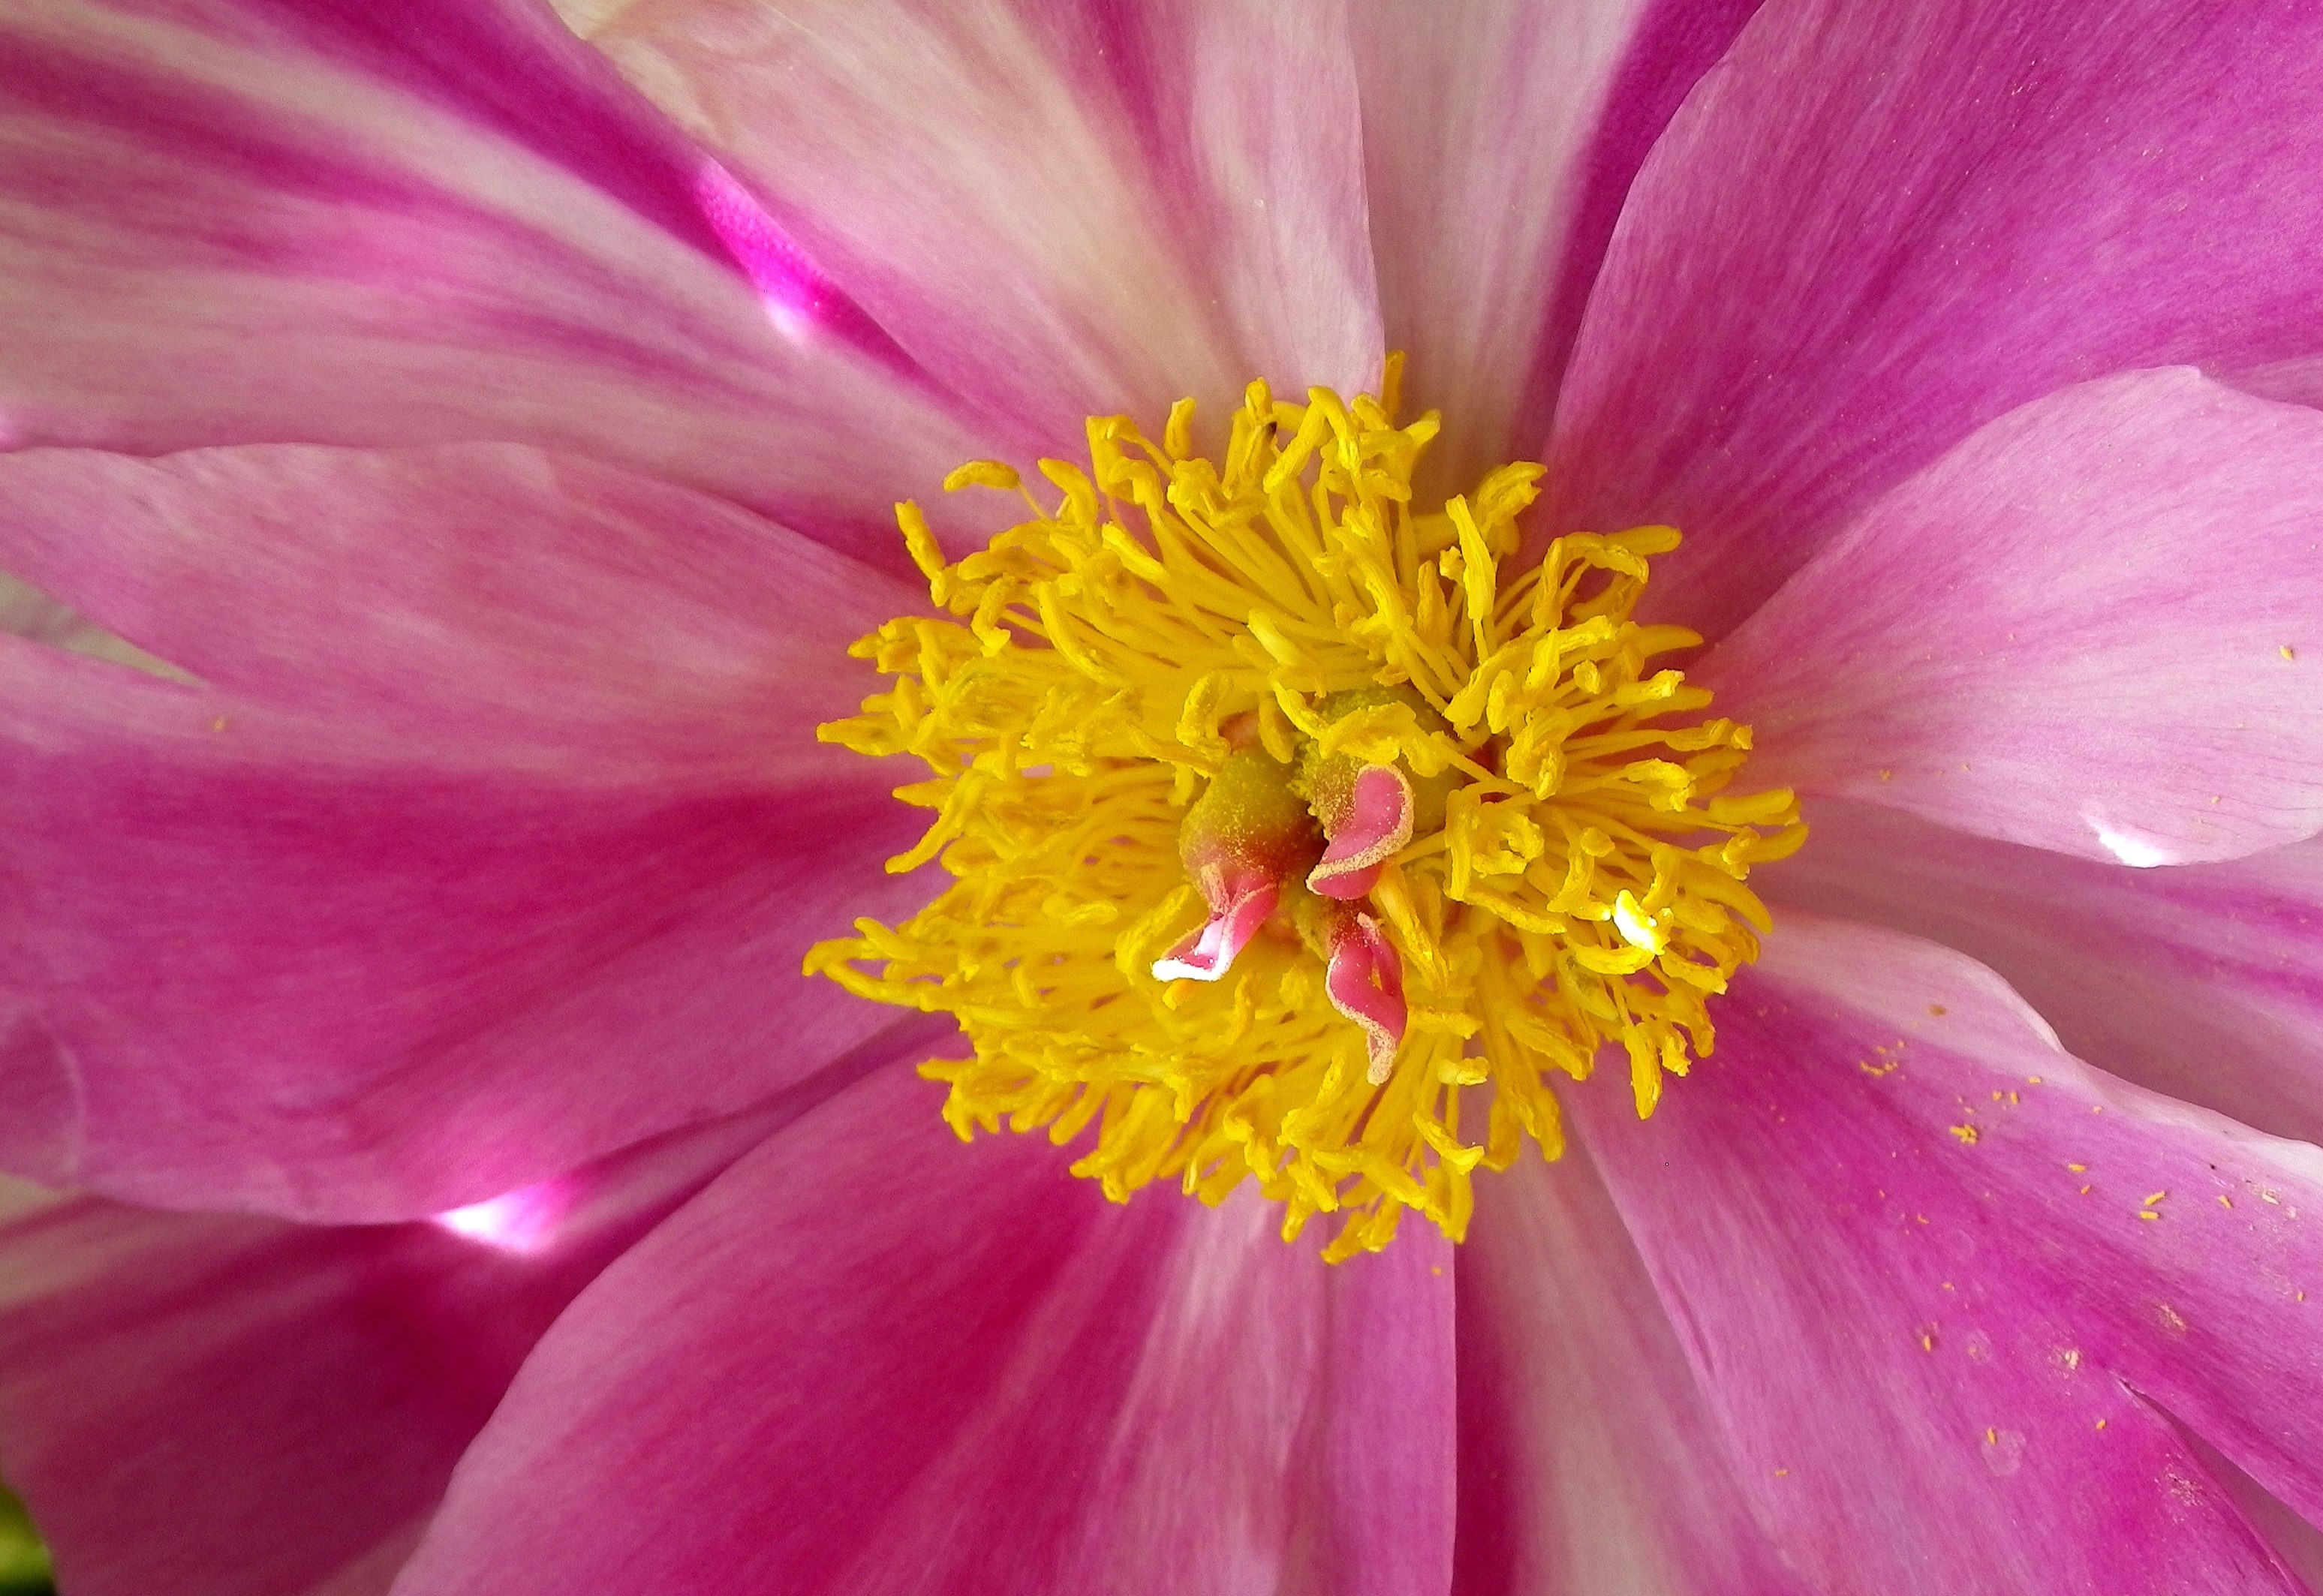 pink petaled flower with yellow center